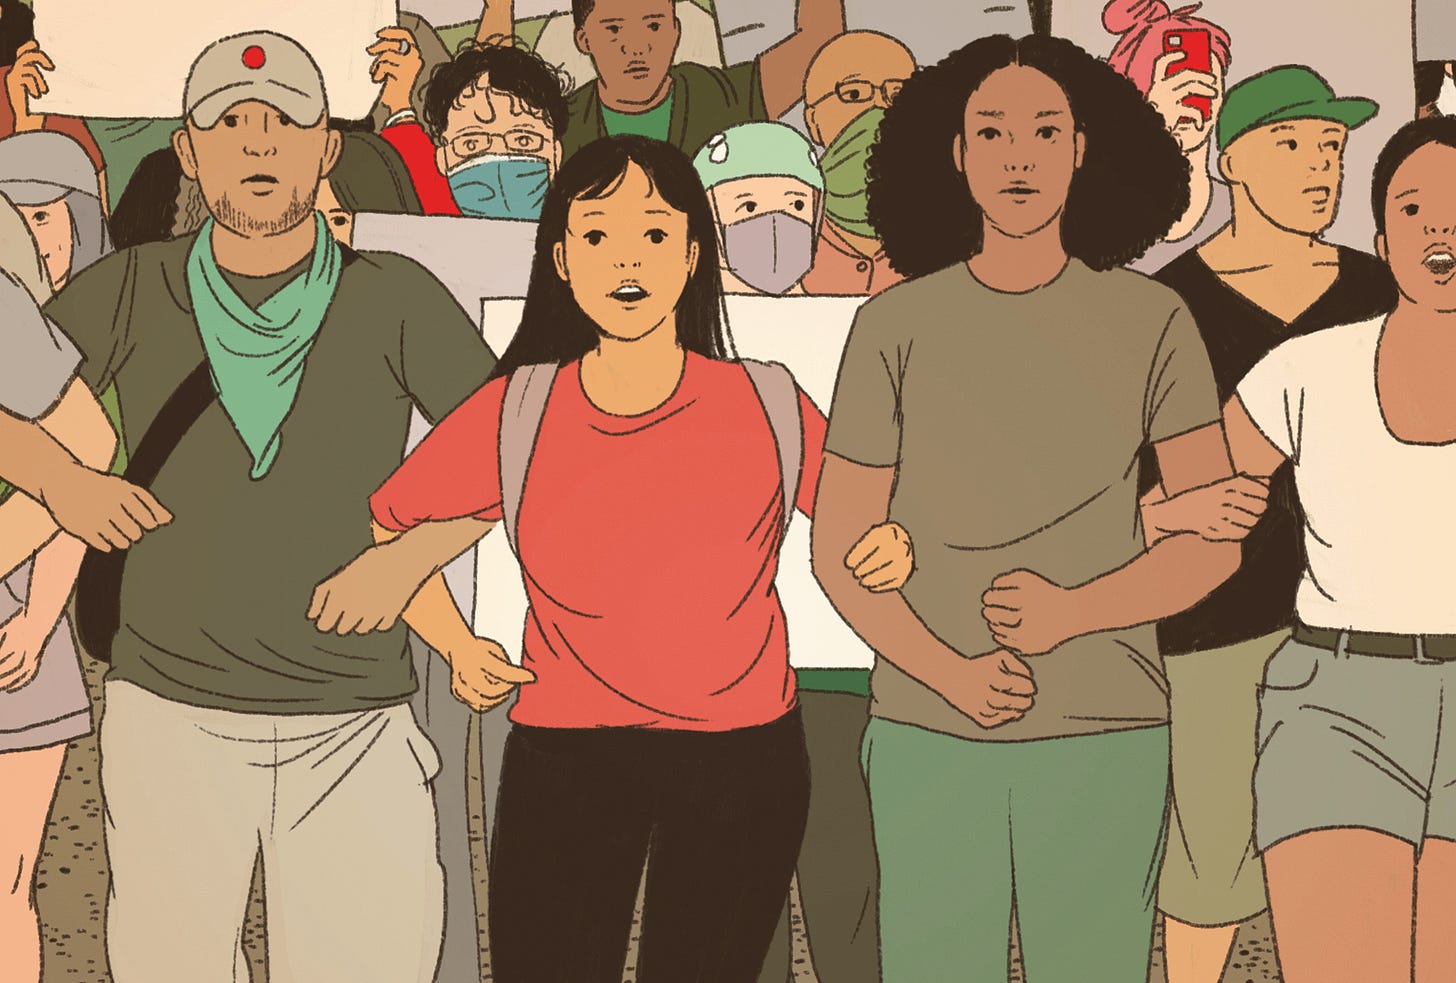 The illustration shows an Asian American couple standing in front of their grocery store. 